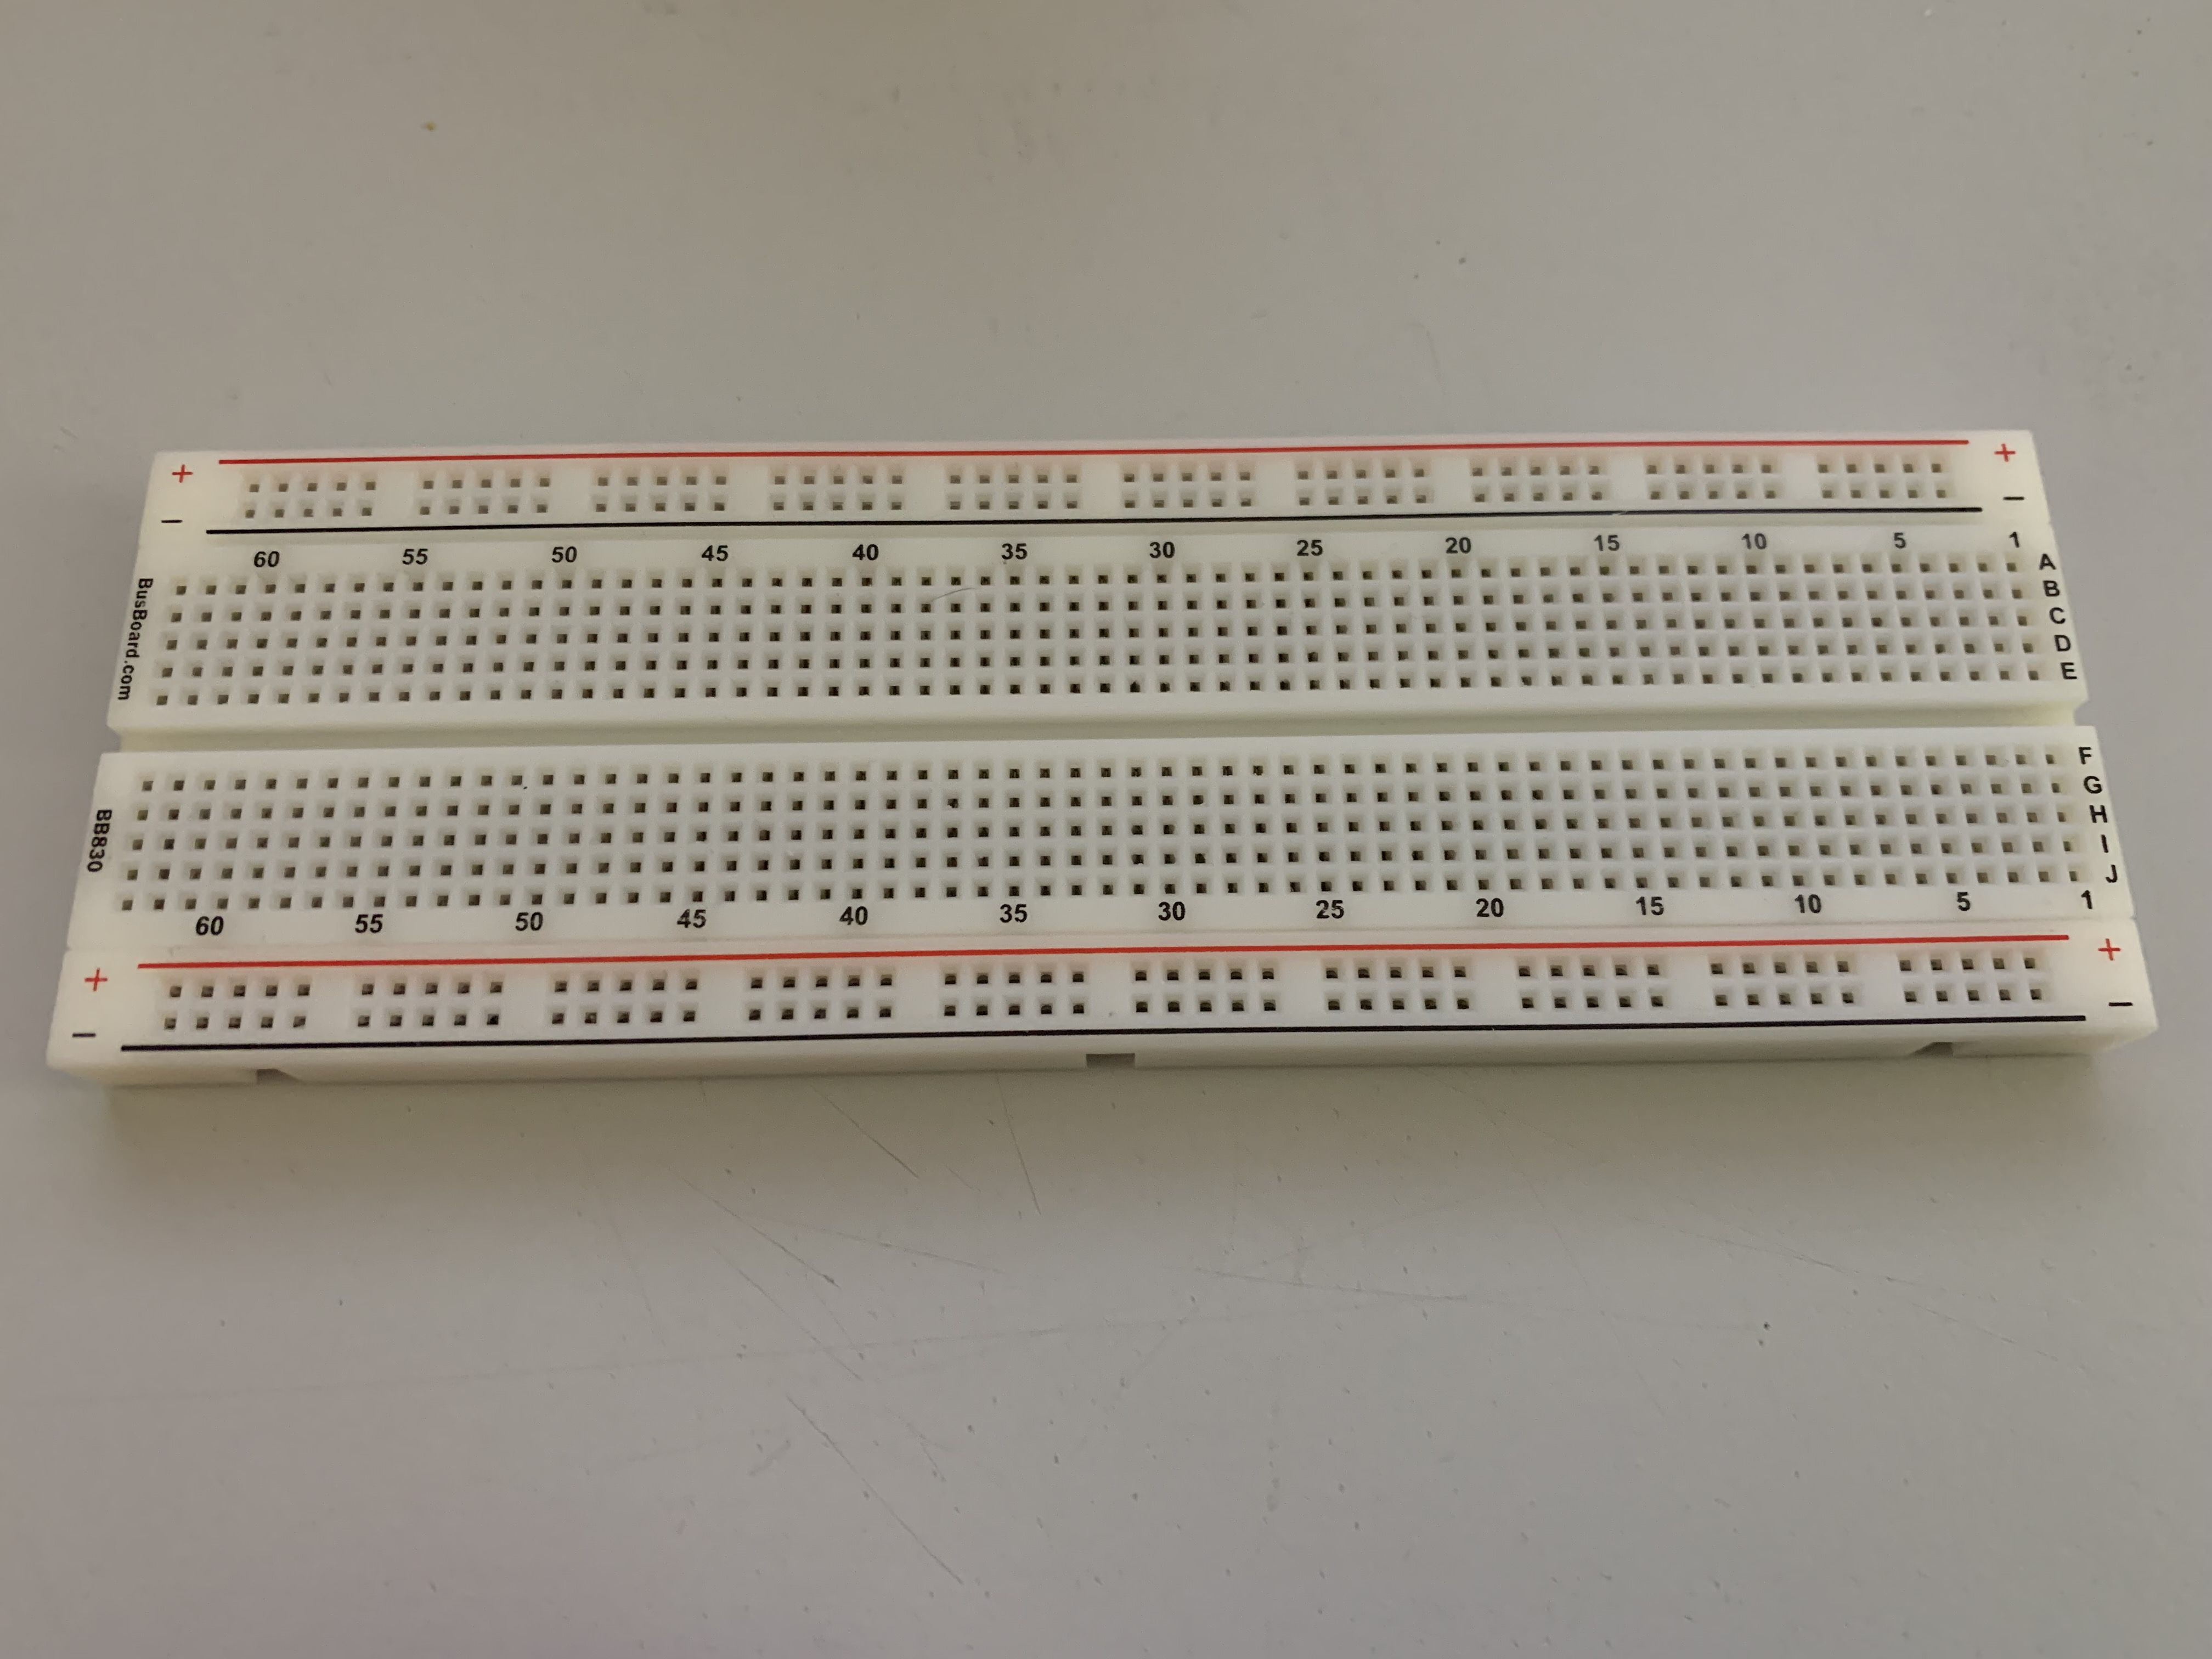 An image of a typical electronics prototyping breadboard